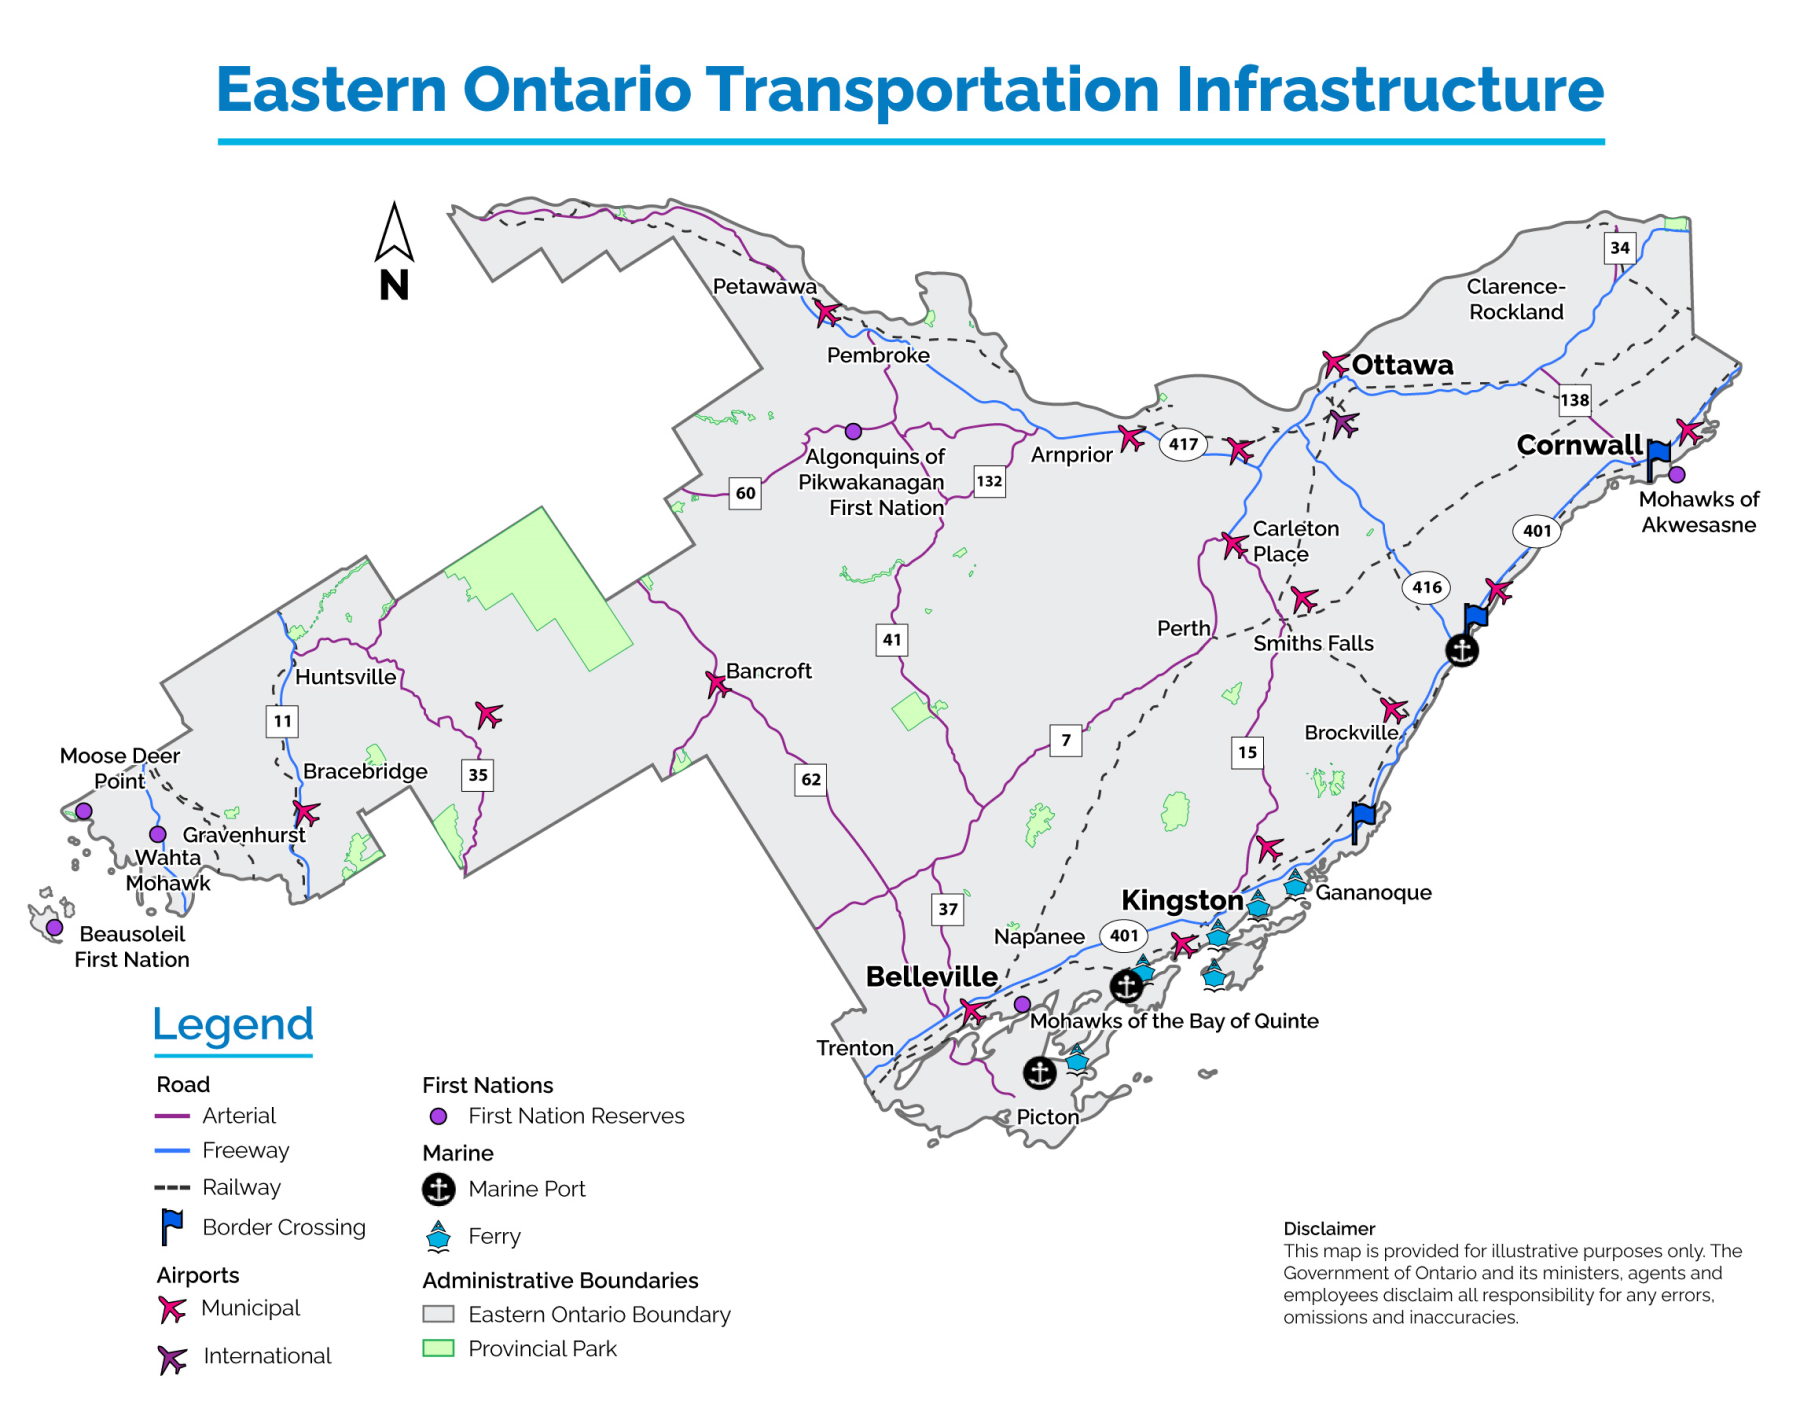 Map of the Eastern Ontario transportation infrastructure. Map legend includes arterial roads, freeway, railway, border crossing, municipal airports, international airports, First Nations reserves, marine ports, ferries, provincial parks, and the Eastern Ontario boundary.